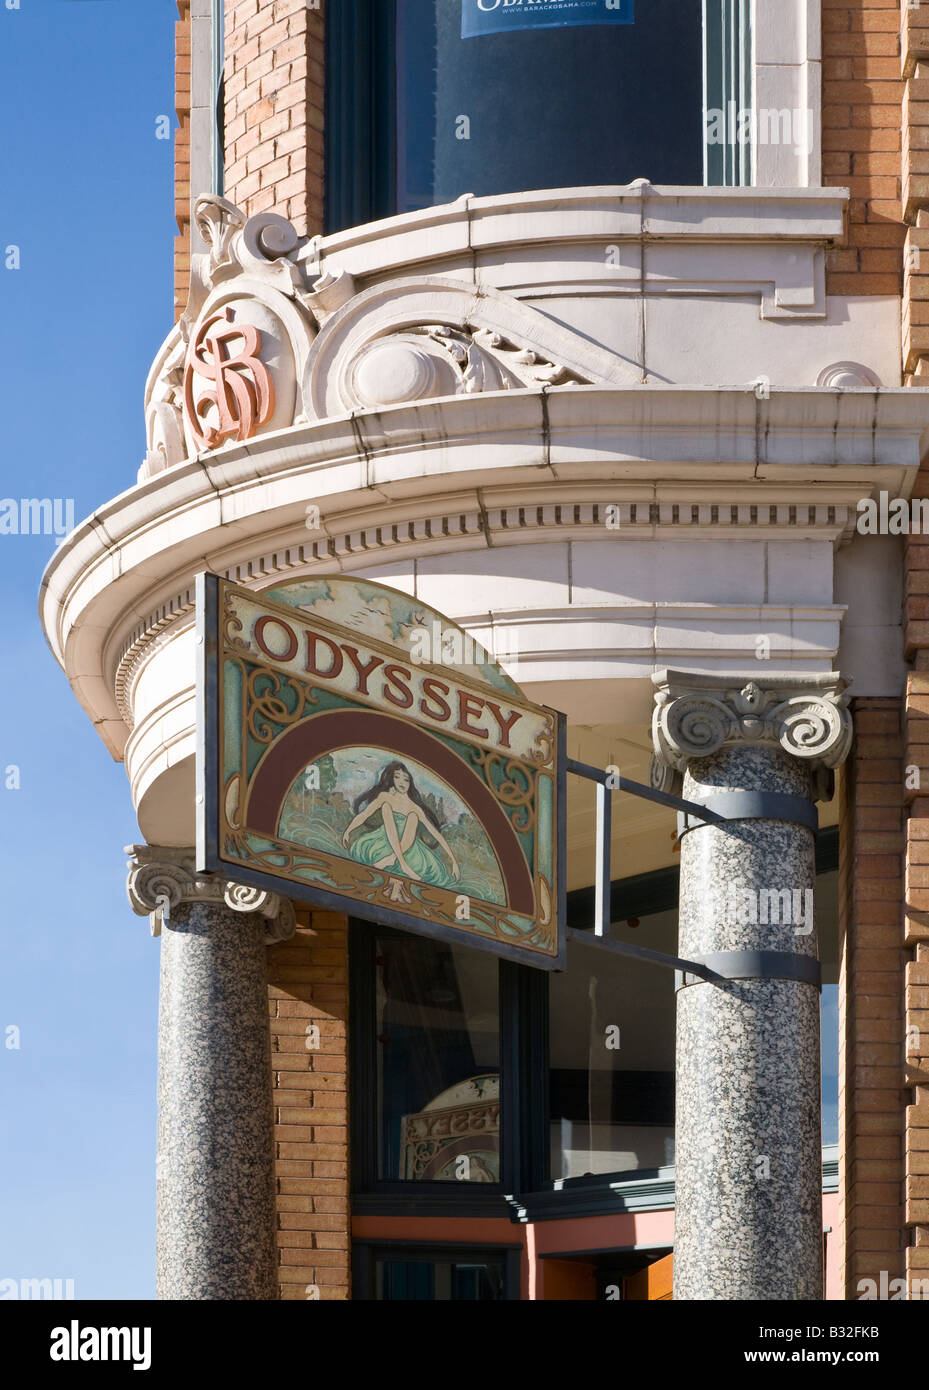 ODYSSEY SIGN on a historic brick building on MAIN STREET in BOZEMAN MONTANA the gateway to Yellowstone National Park Stock Photo